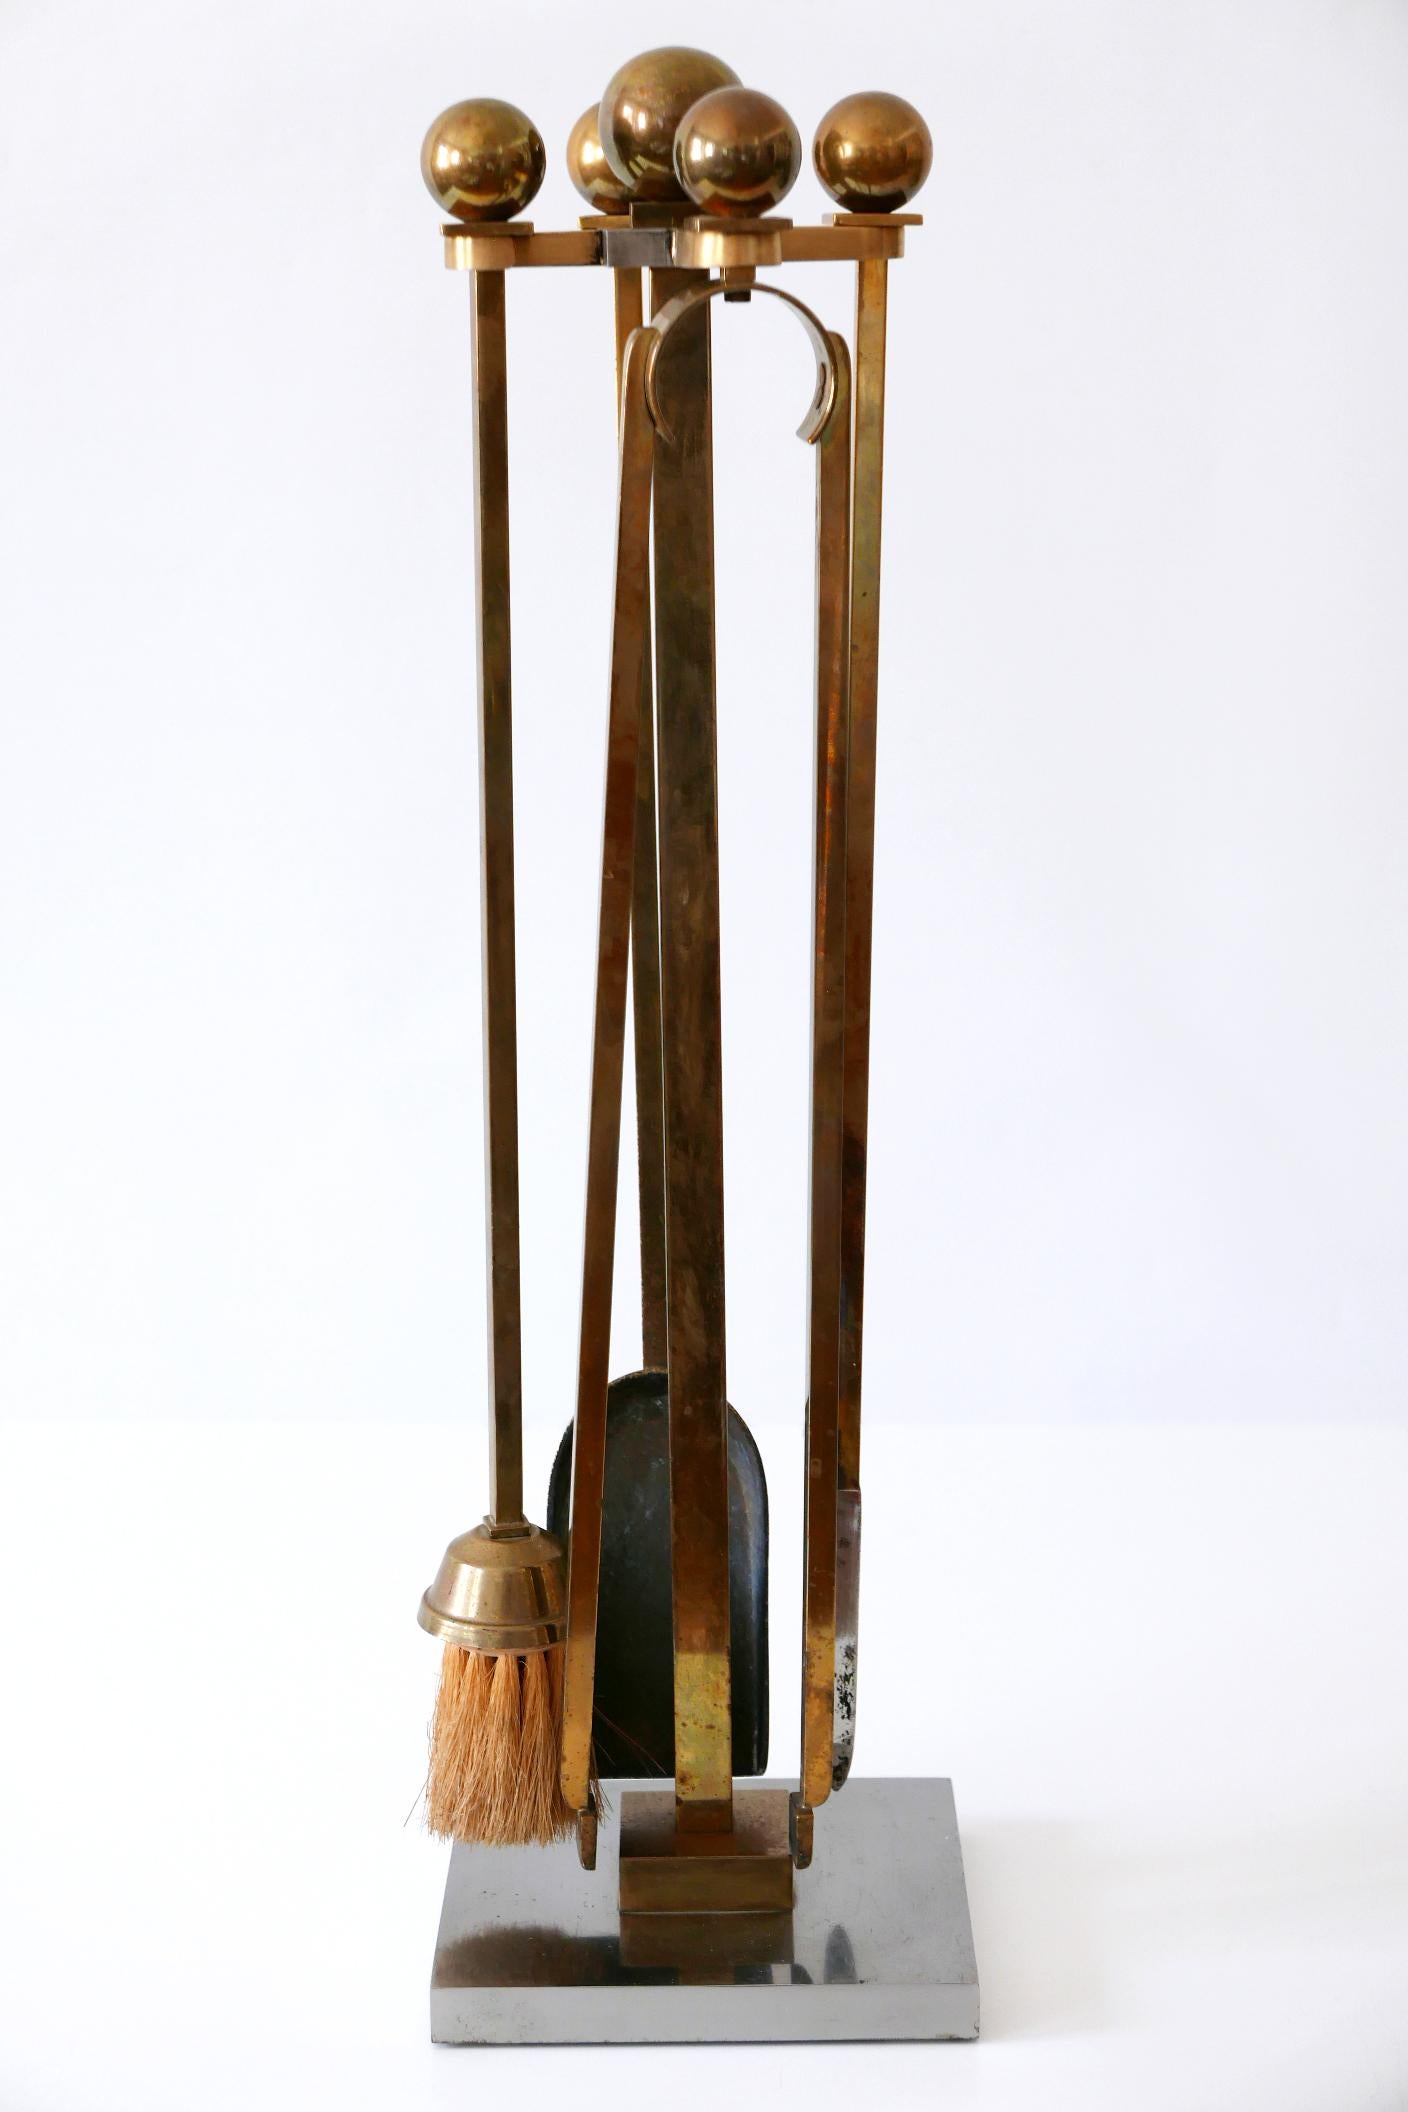 Exceptional Mid-Century Modern Brass and Steel Fireplace Tools 1970s For Sale 9